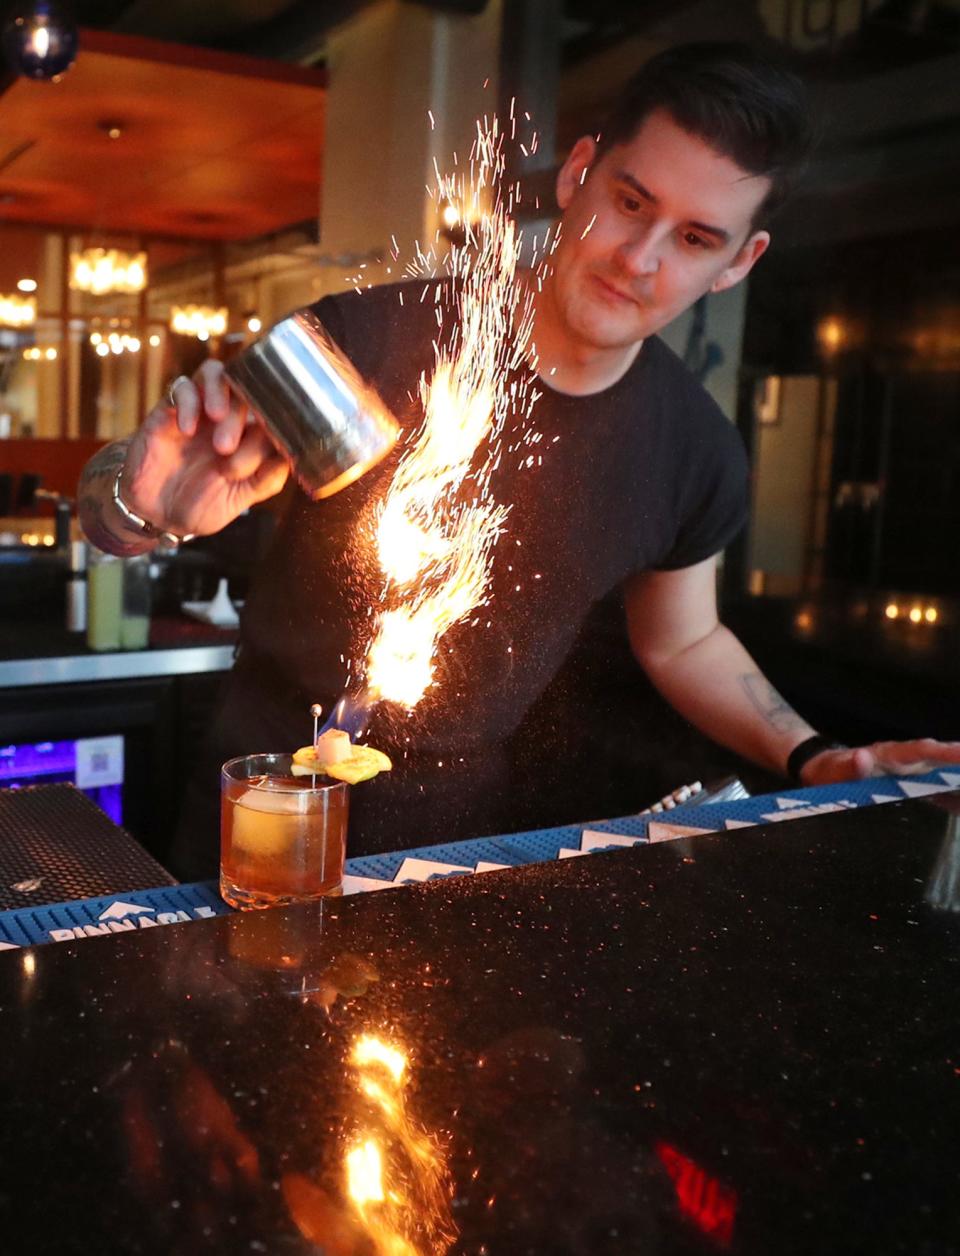 Ryan Austin, partner and mixologist at the new restaurant and bar The Circle of 5ths, makes a seasonal cocktail An Apple a Day at the restaurant located above Blue Jazz+ in Akron. The drink flames up when cinnamon is shaken over a flaming sugar cube.